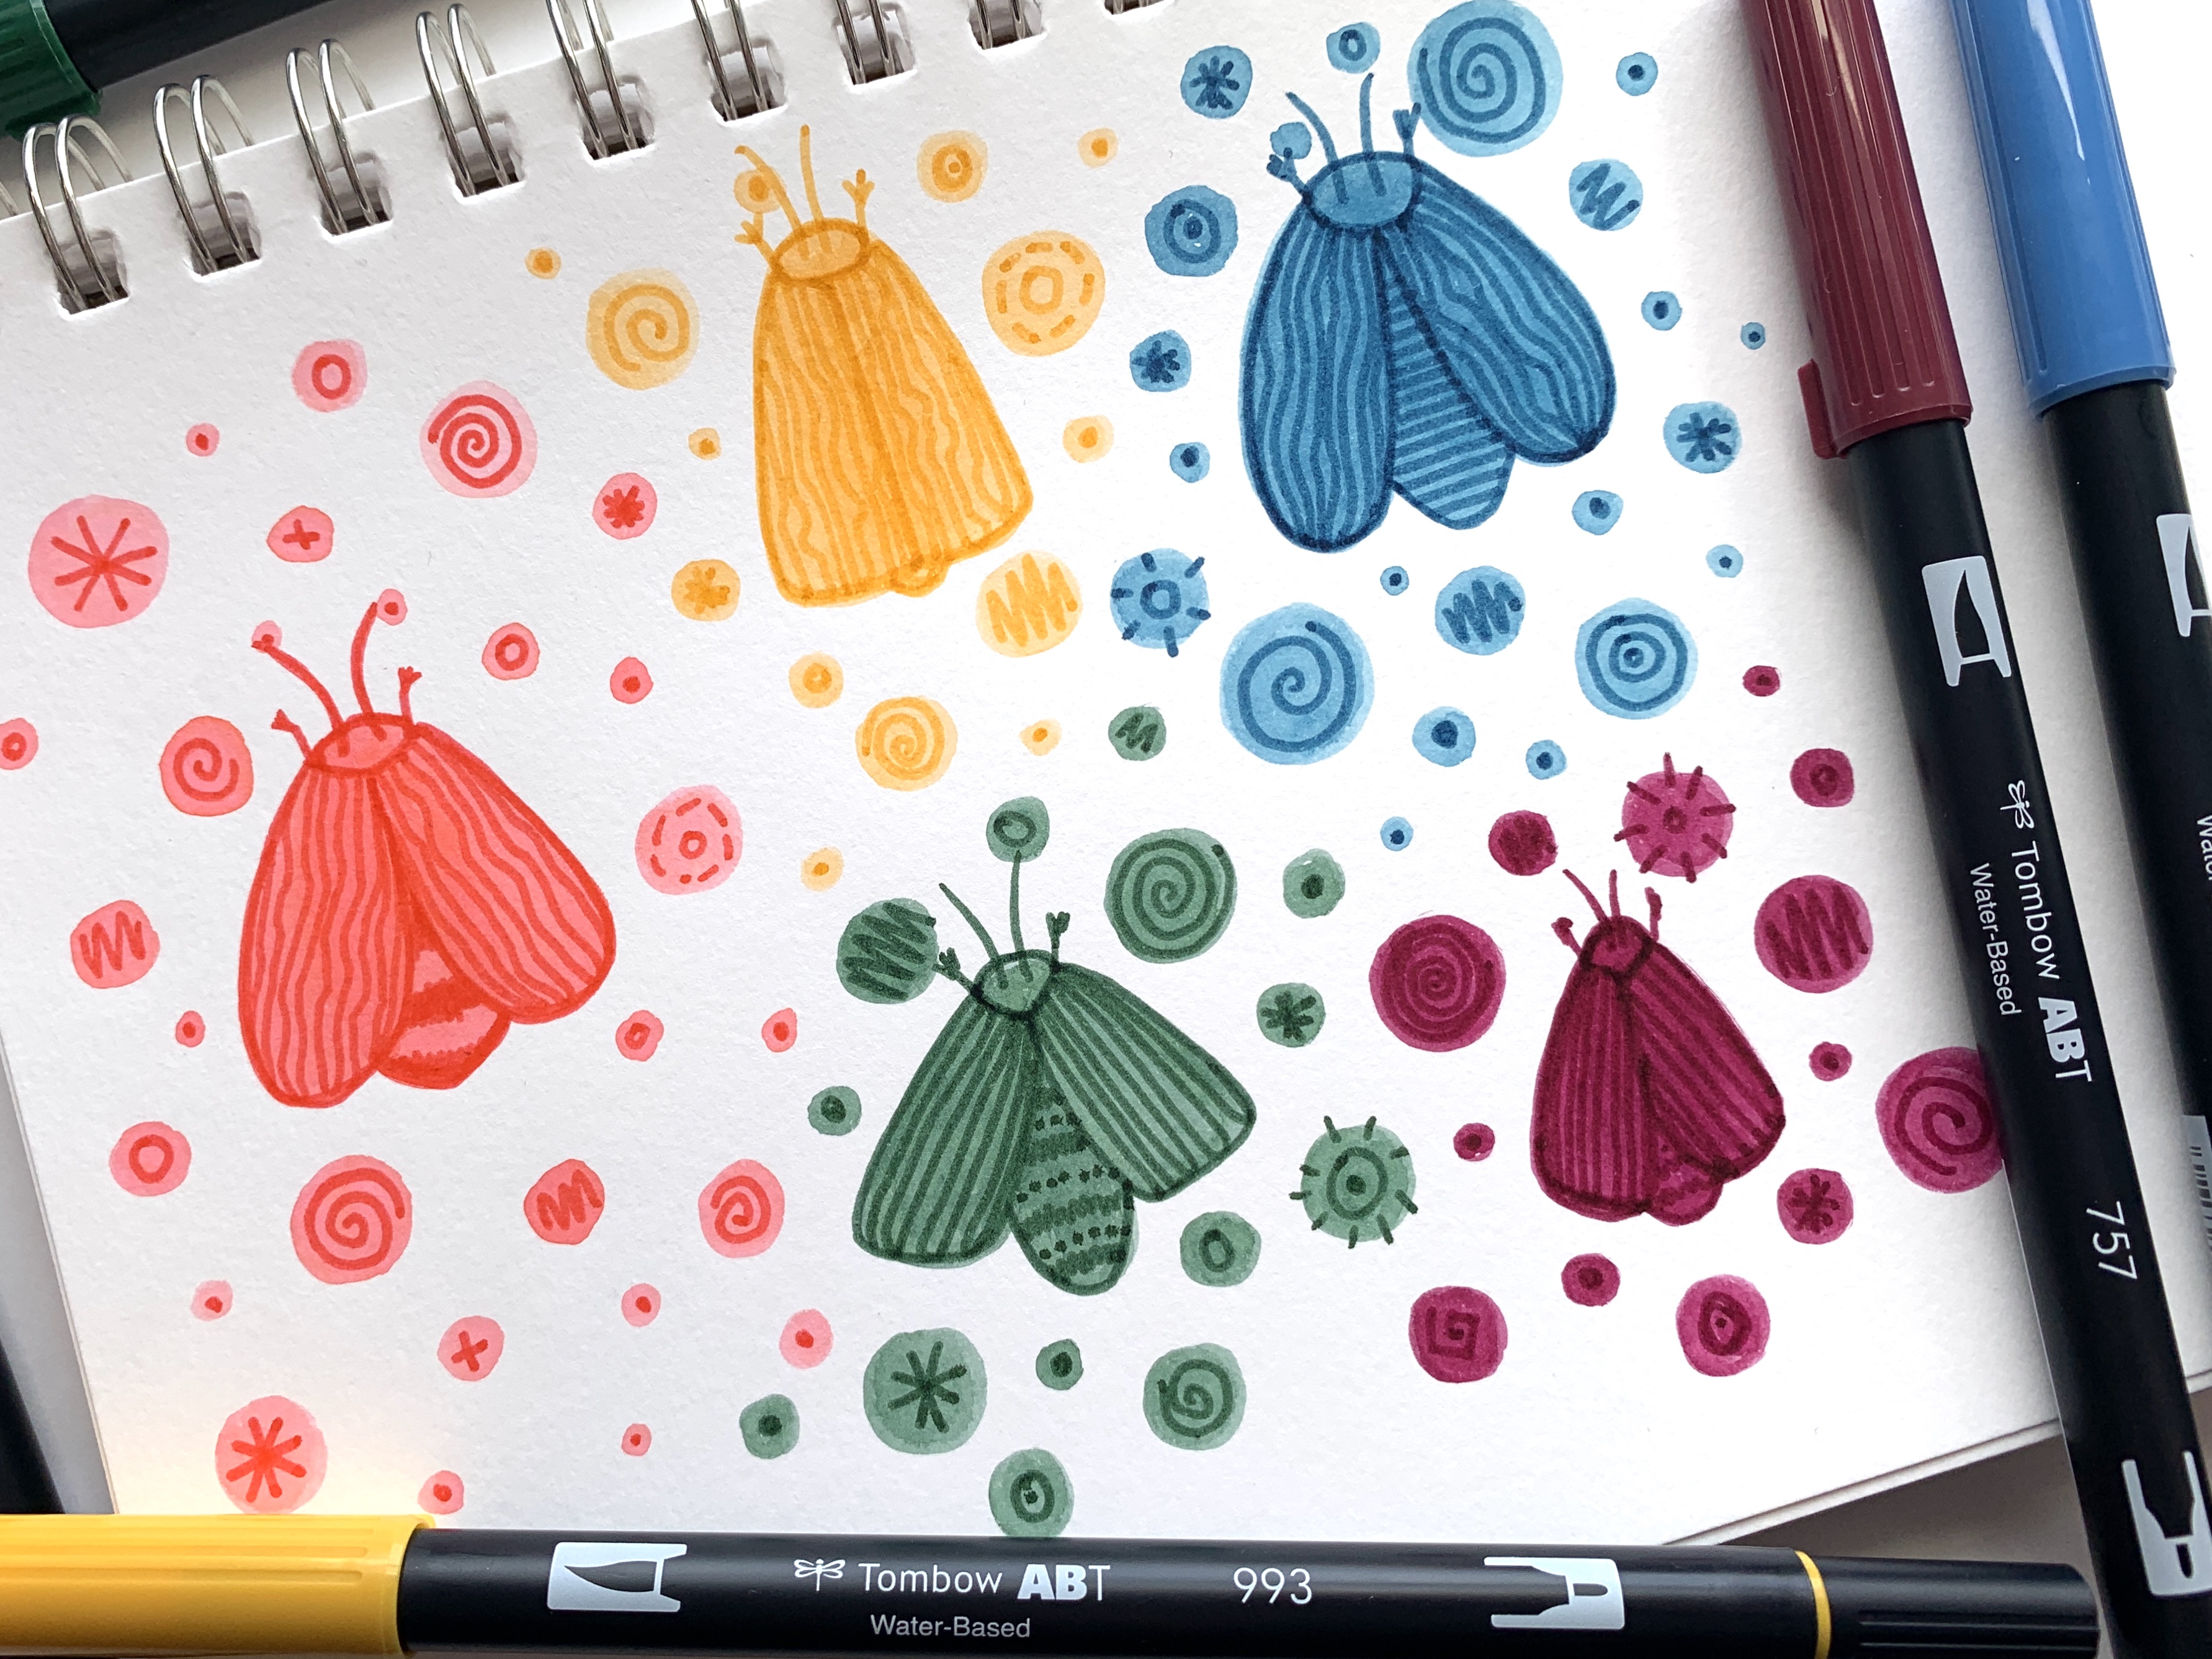 The @TombowUSA Dual Brush Pens are perfect for making simple, but beautiful watercolor projects! Tutorial by @LePereLetters. #DualBrushPens #Mothart #artprojectideas